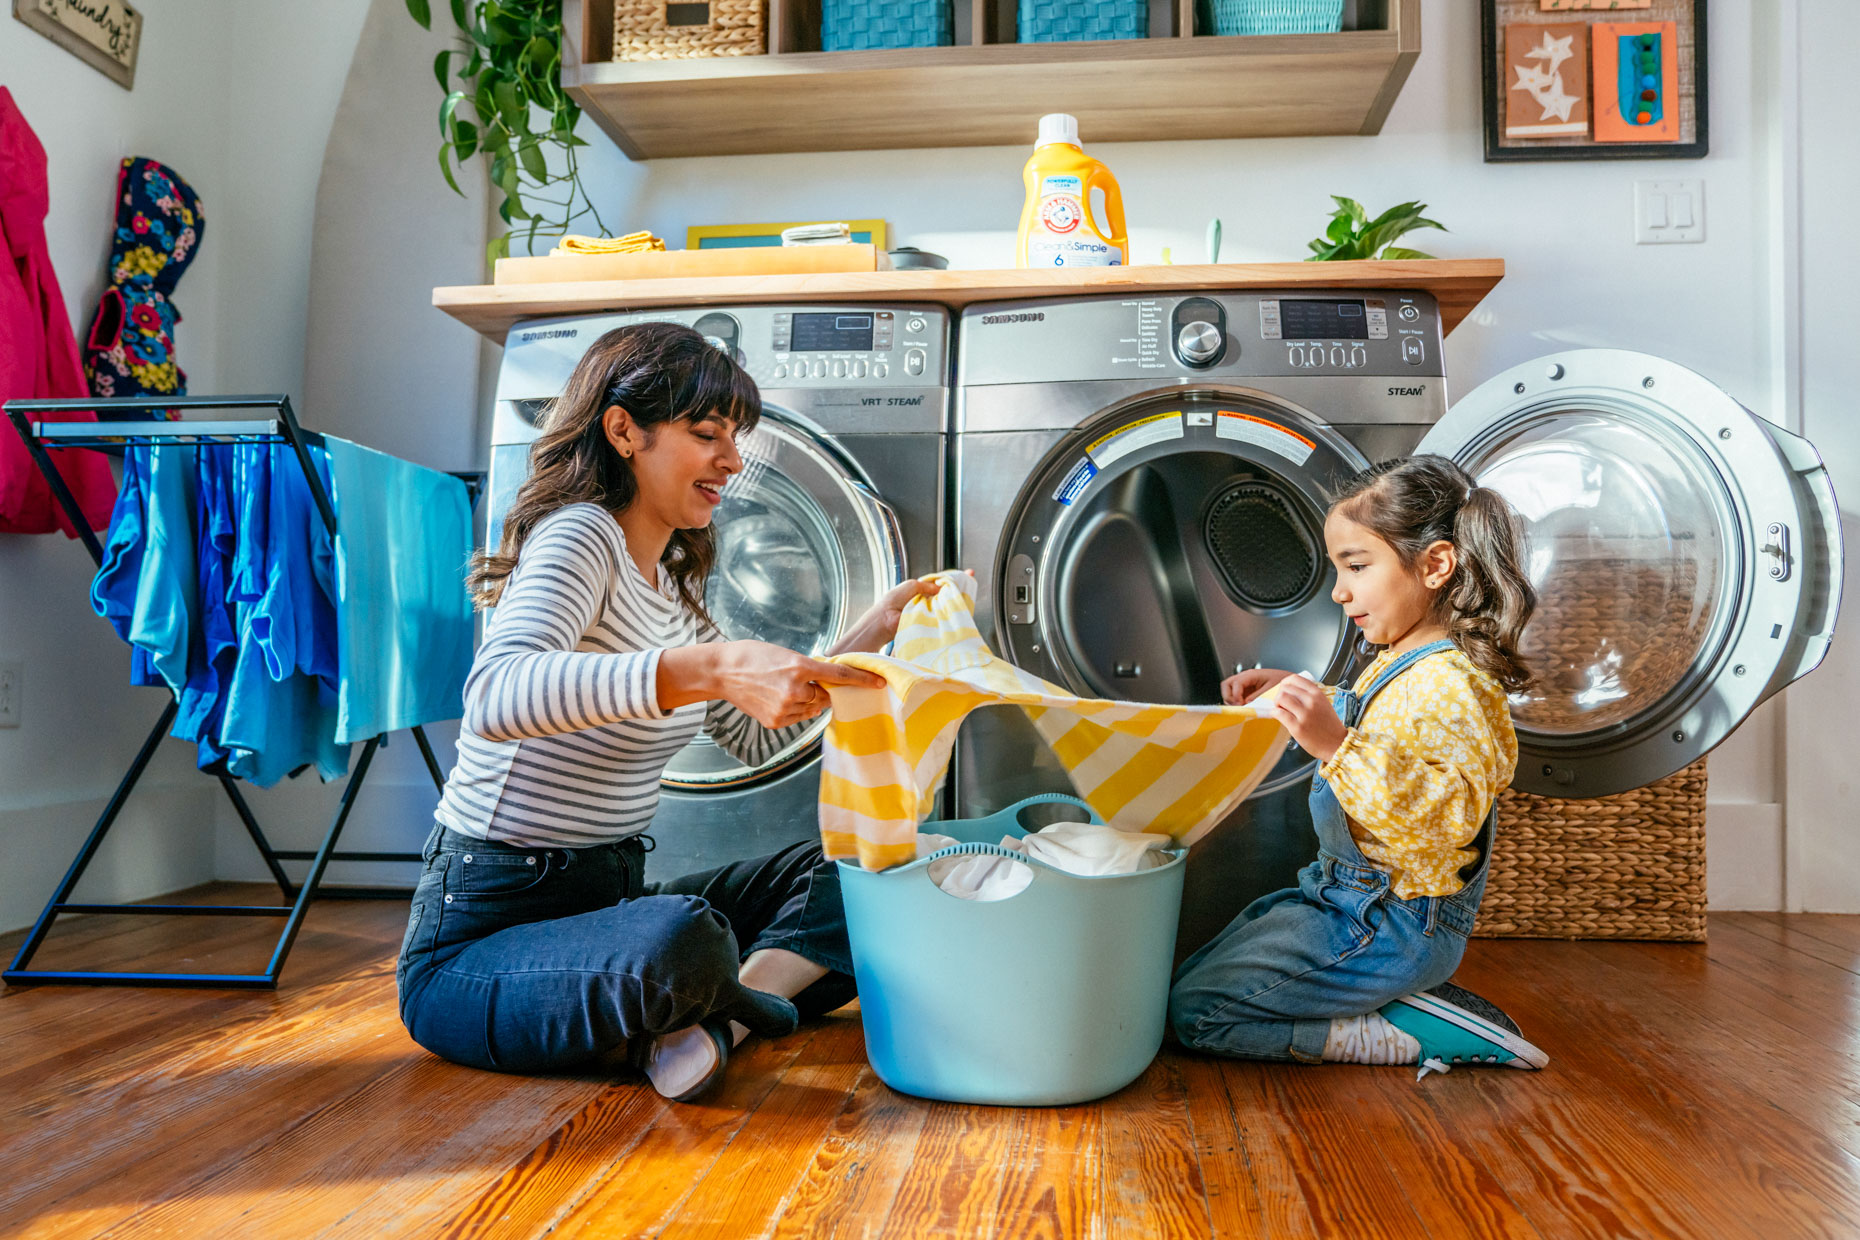 Mom and daughter folding laundry together on floor by washer dryer